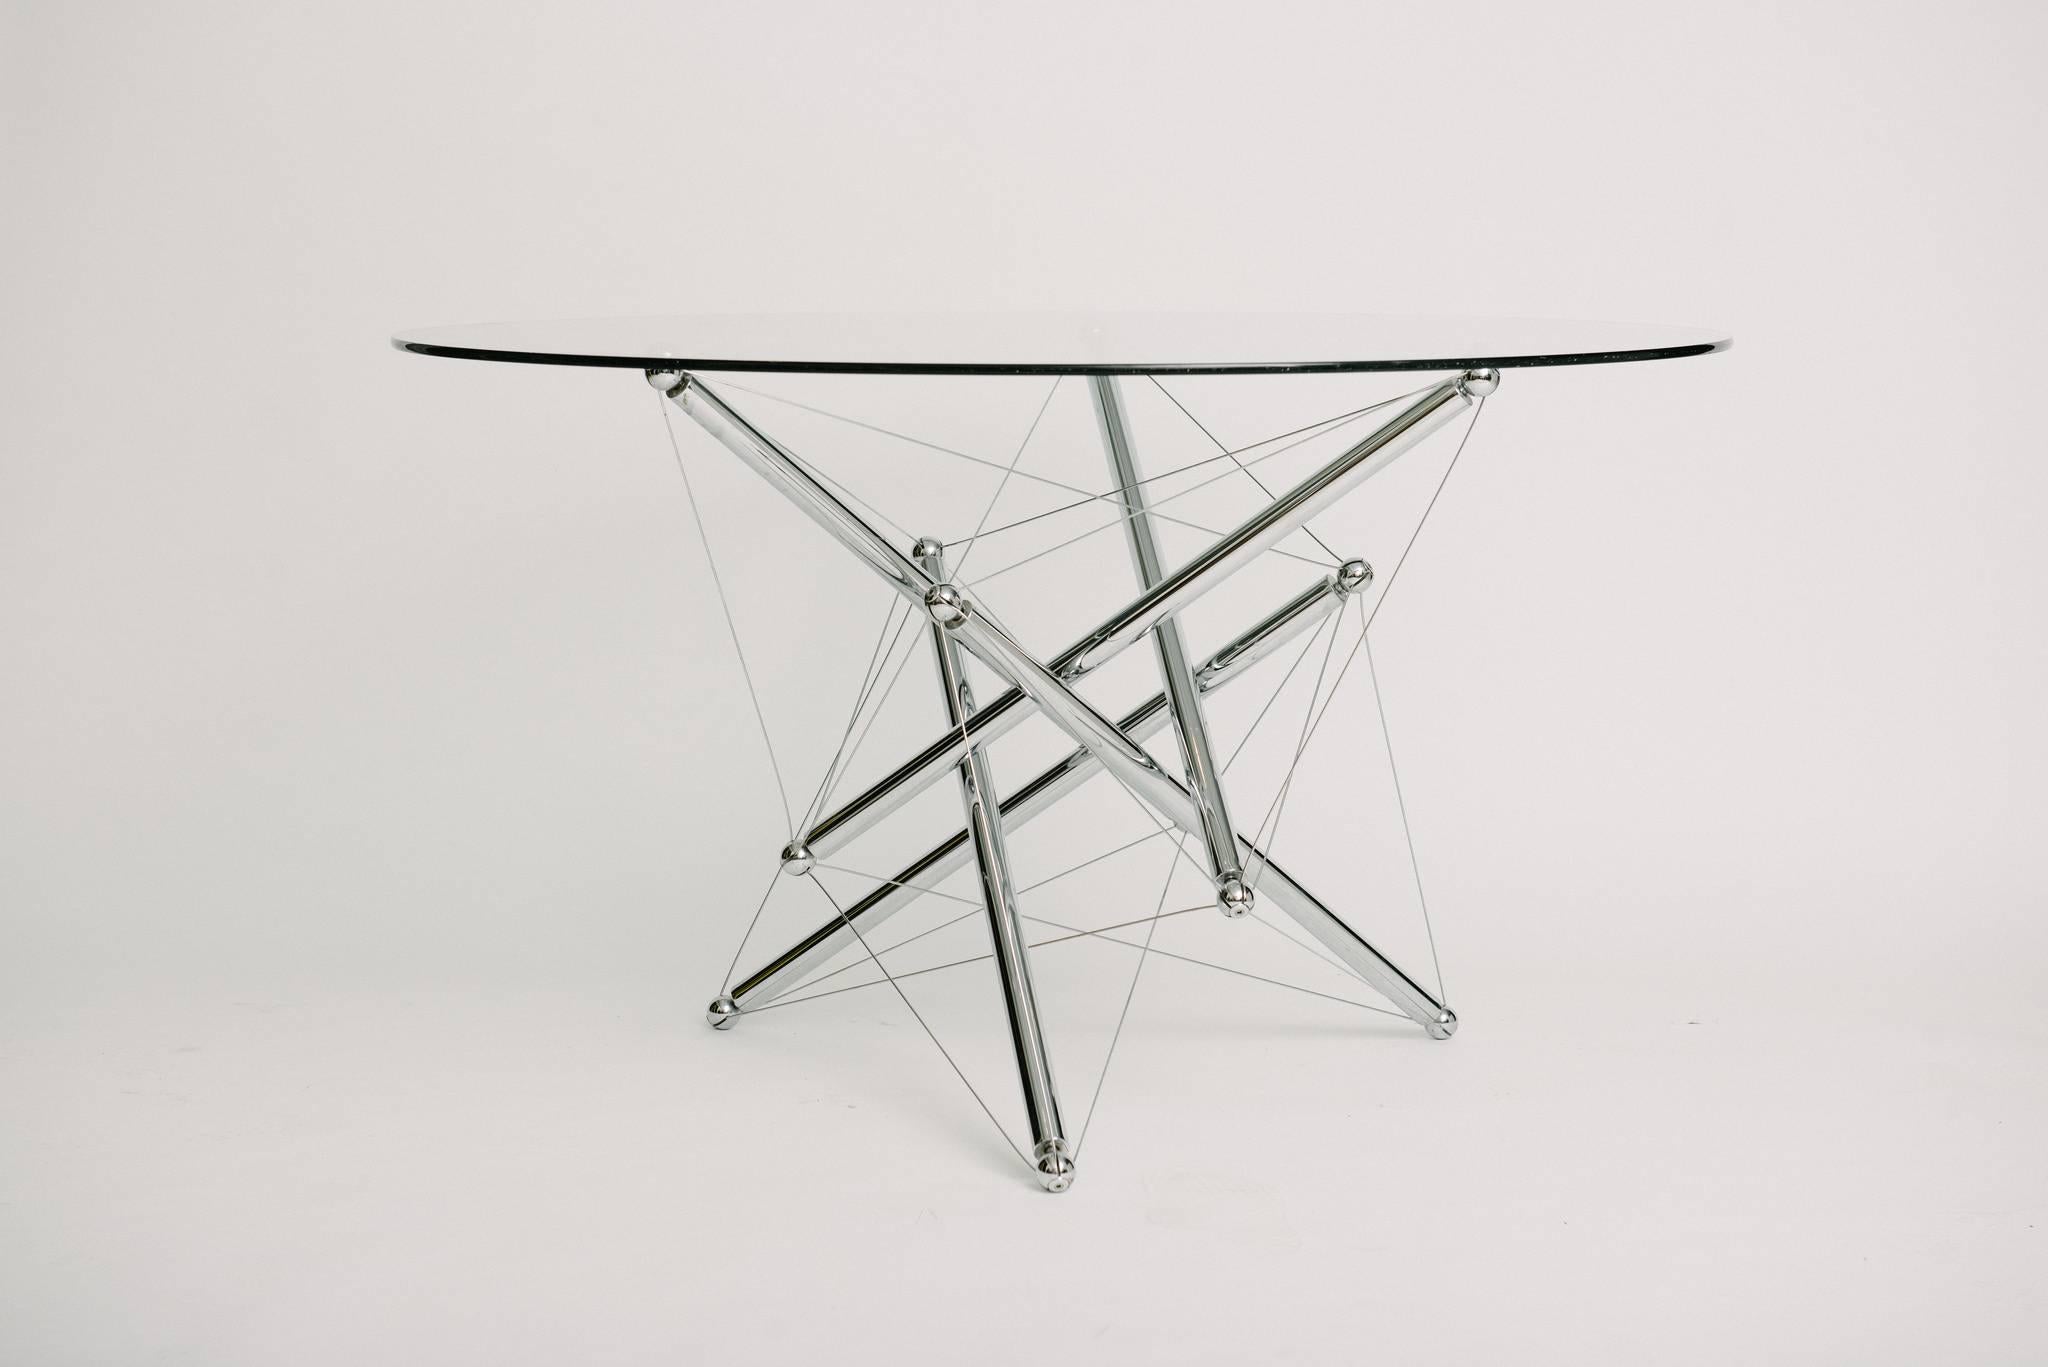 Dining table base designed by Theodore Waddell for Cassina in 1972. 

The table base is polished chrome-plated steel with steel tension wires.

Tensegrity is the characteristic property of a stabile three-dimensional structure consisting of